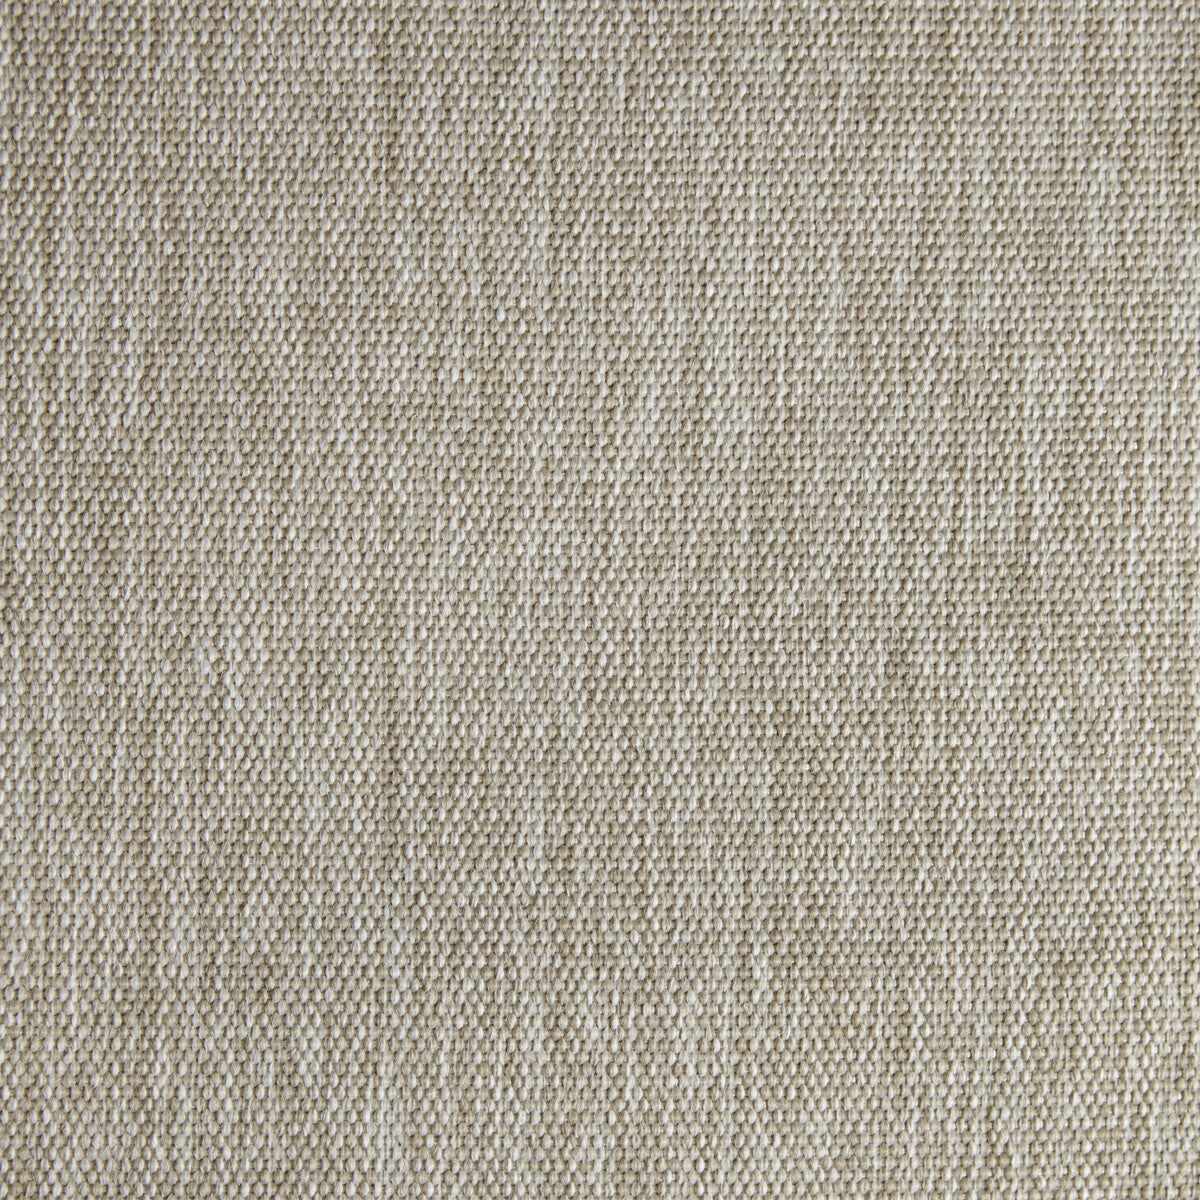 Blanes fabric in 6 color - pattern LZ-30398.06.0 - by Kravet Design in the Lizzo Indoor/Outdoor collection